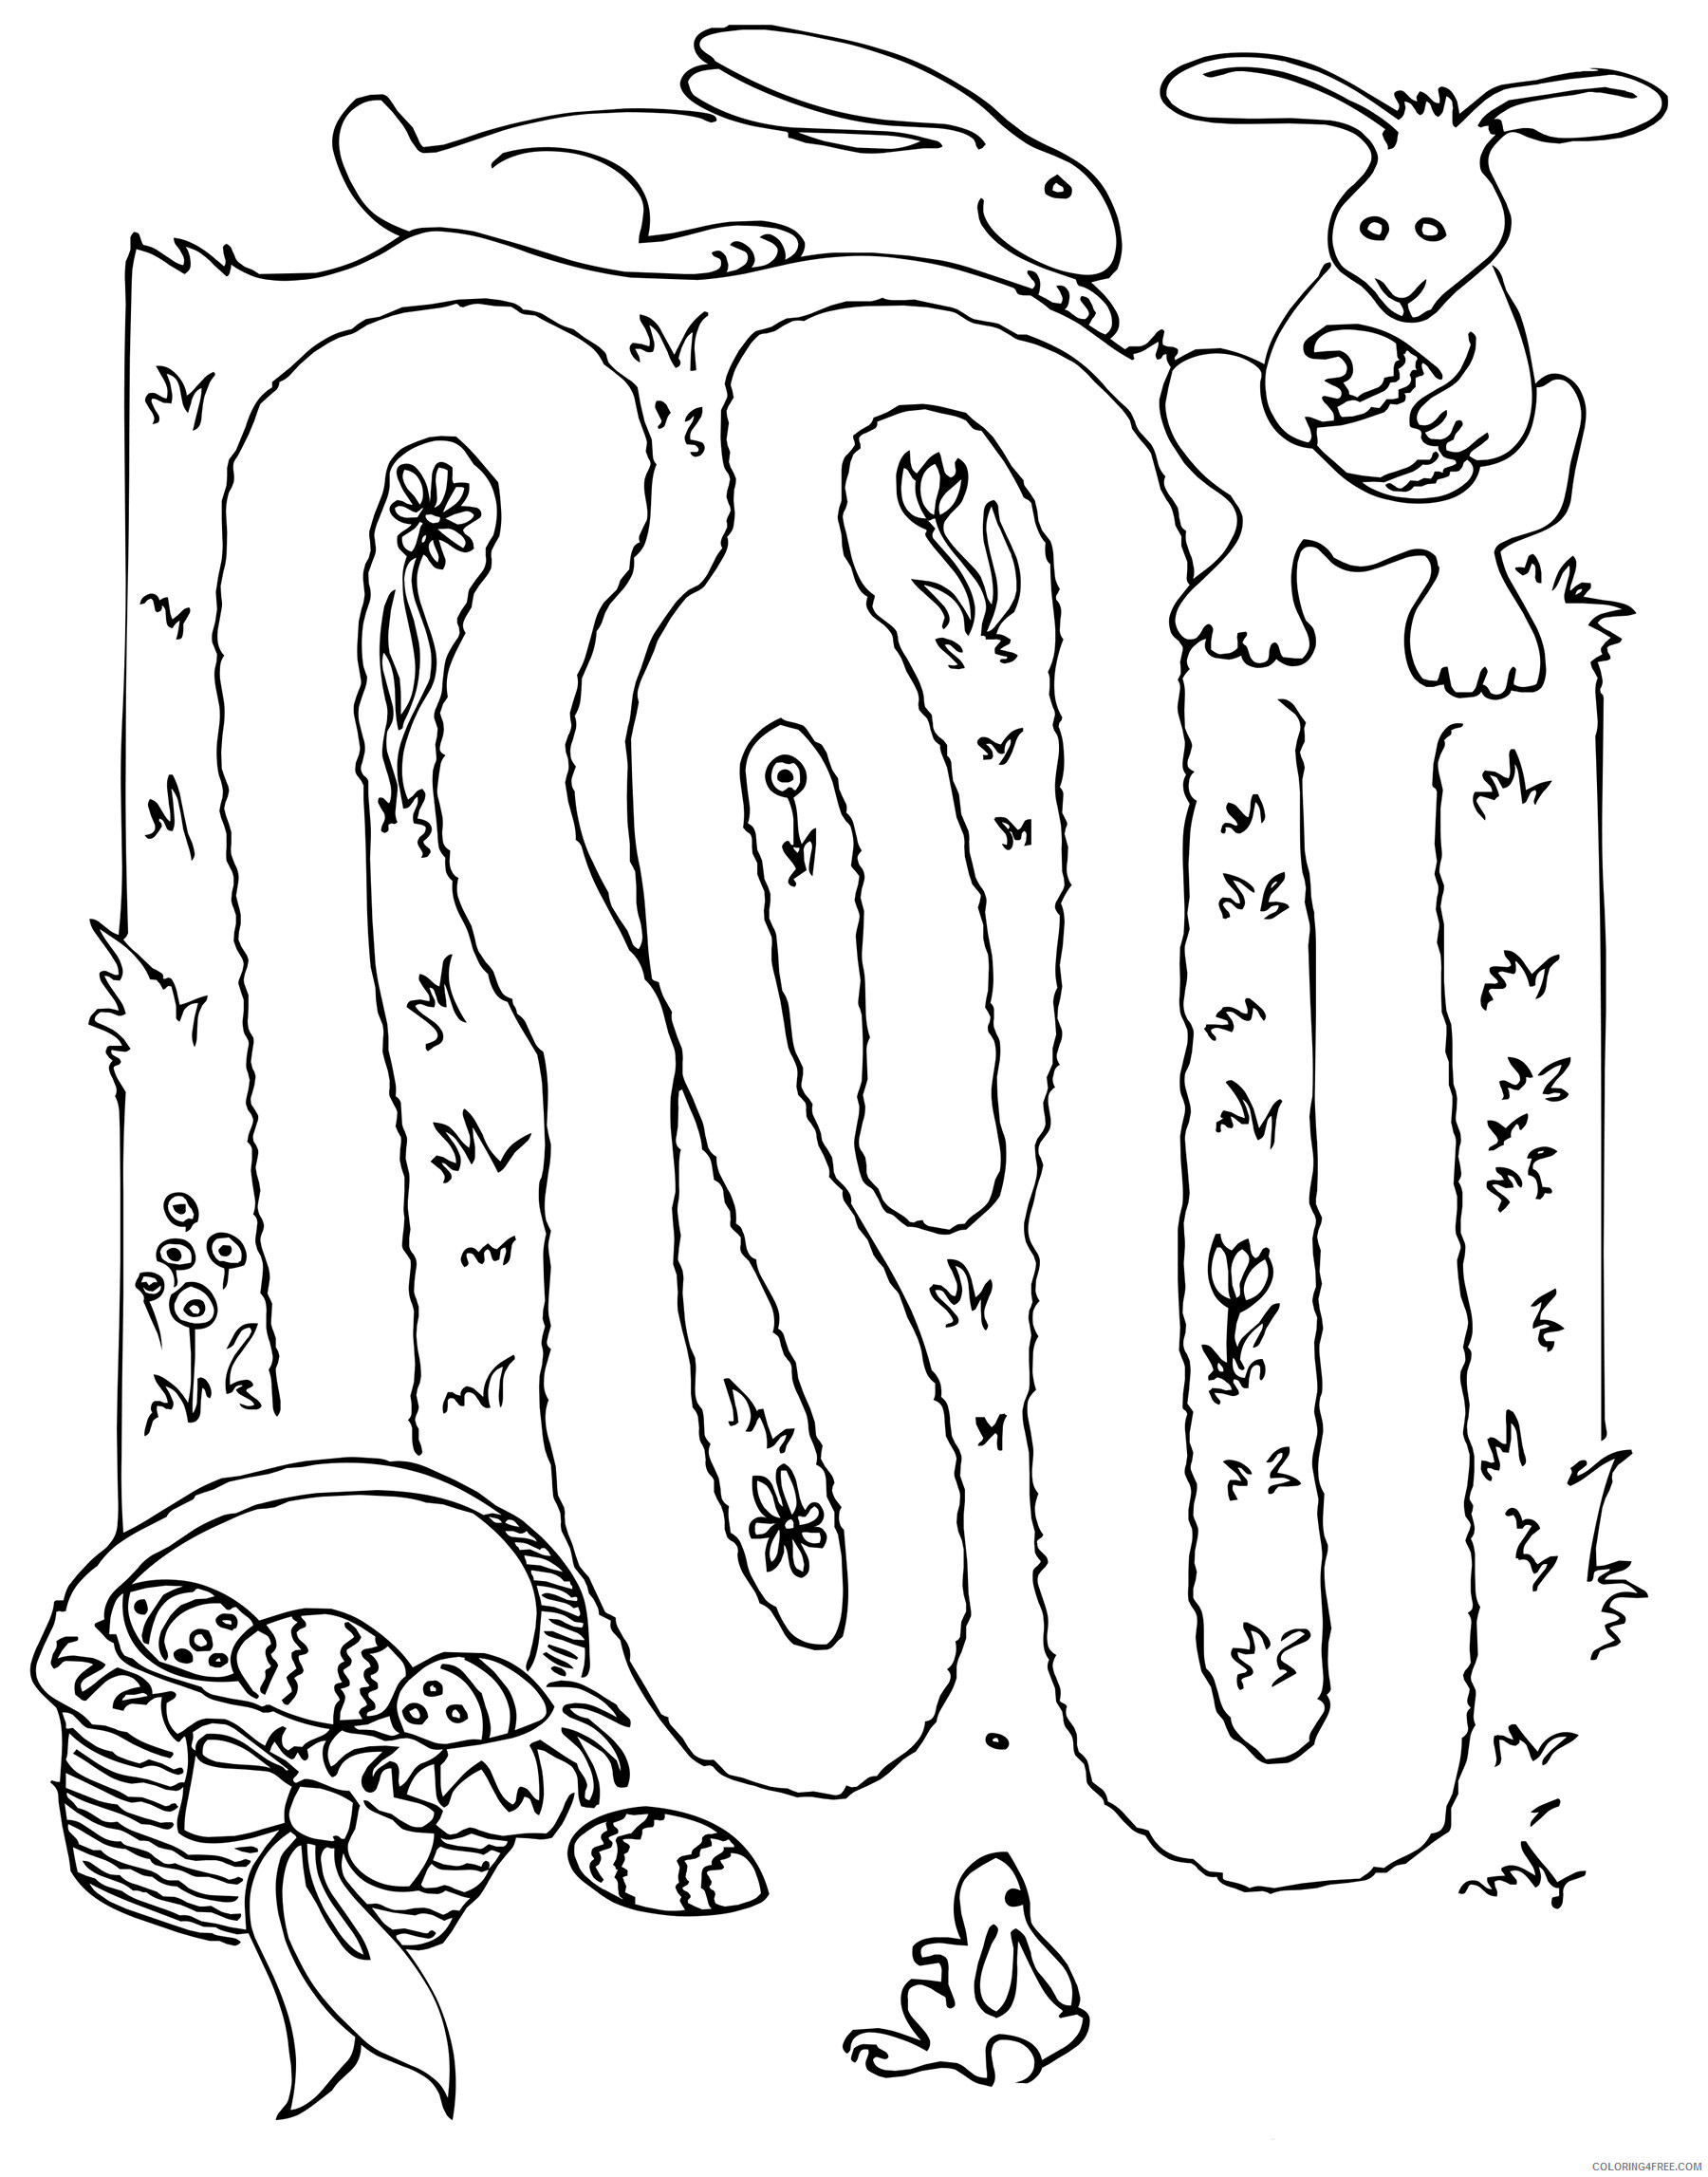 Preschool Coloring Pages Easy Easter Mazes for Preschool Printable 2021 4771 Coloring4free